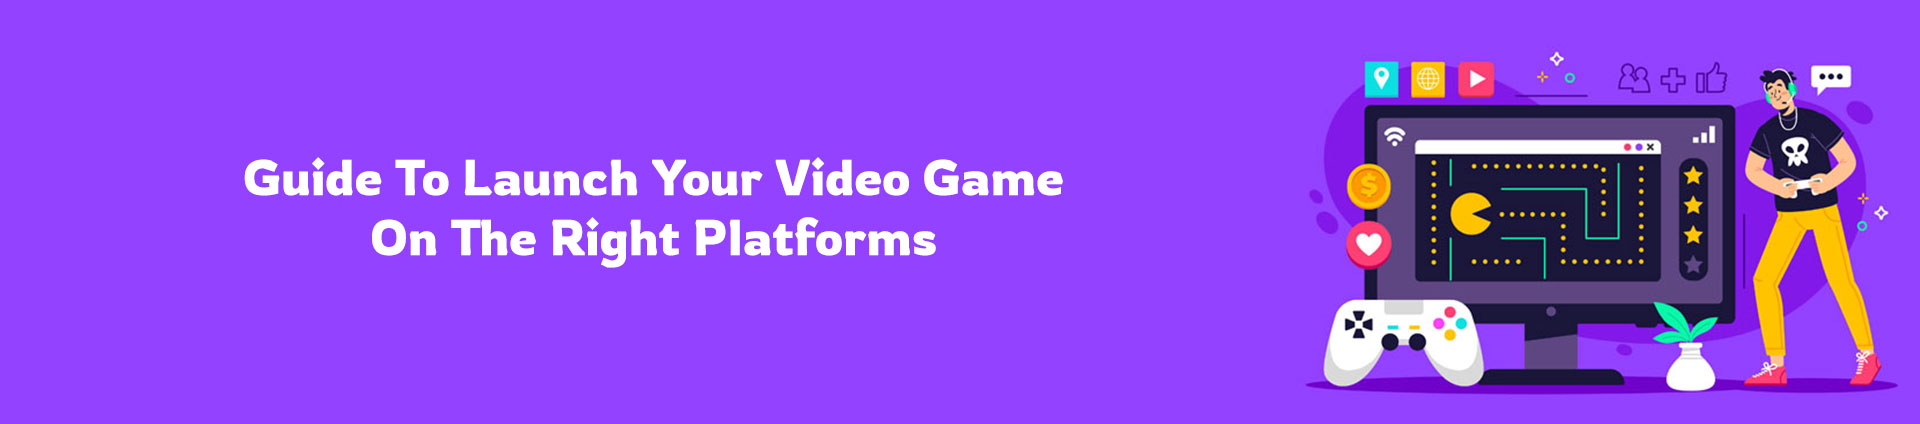 Guide to Launch Video Game in the Right Platform